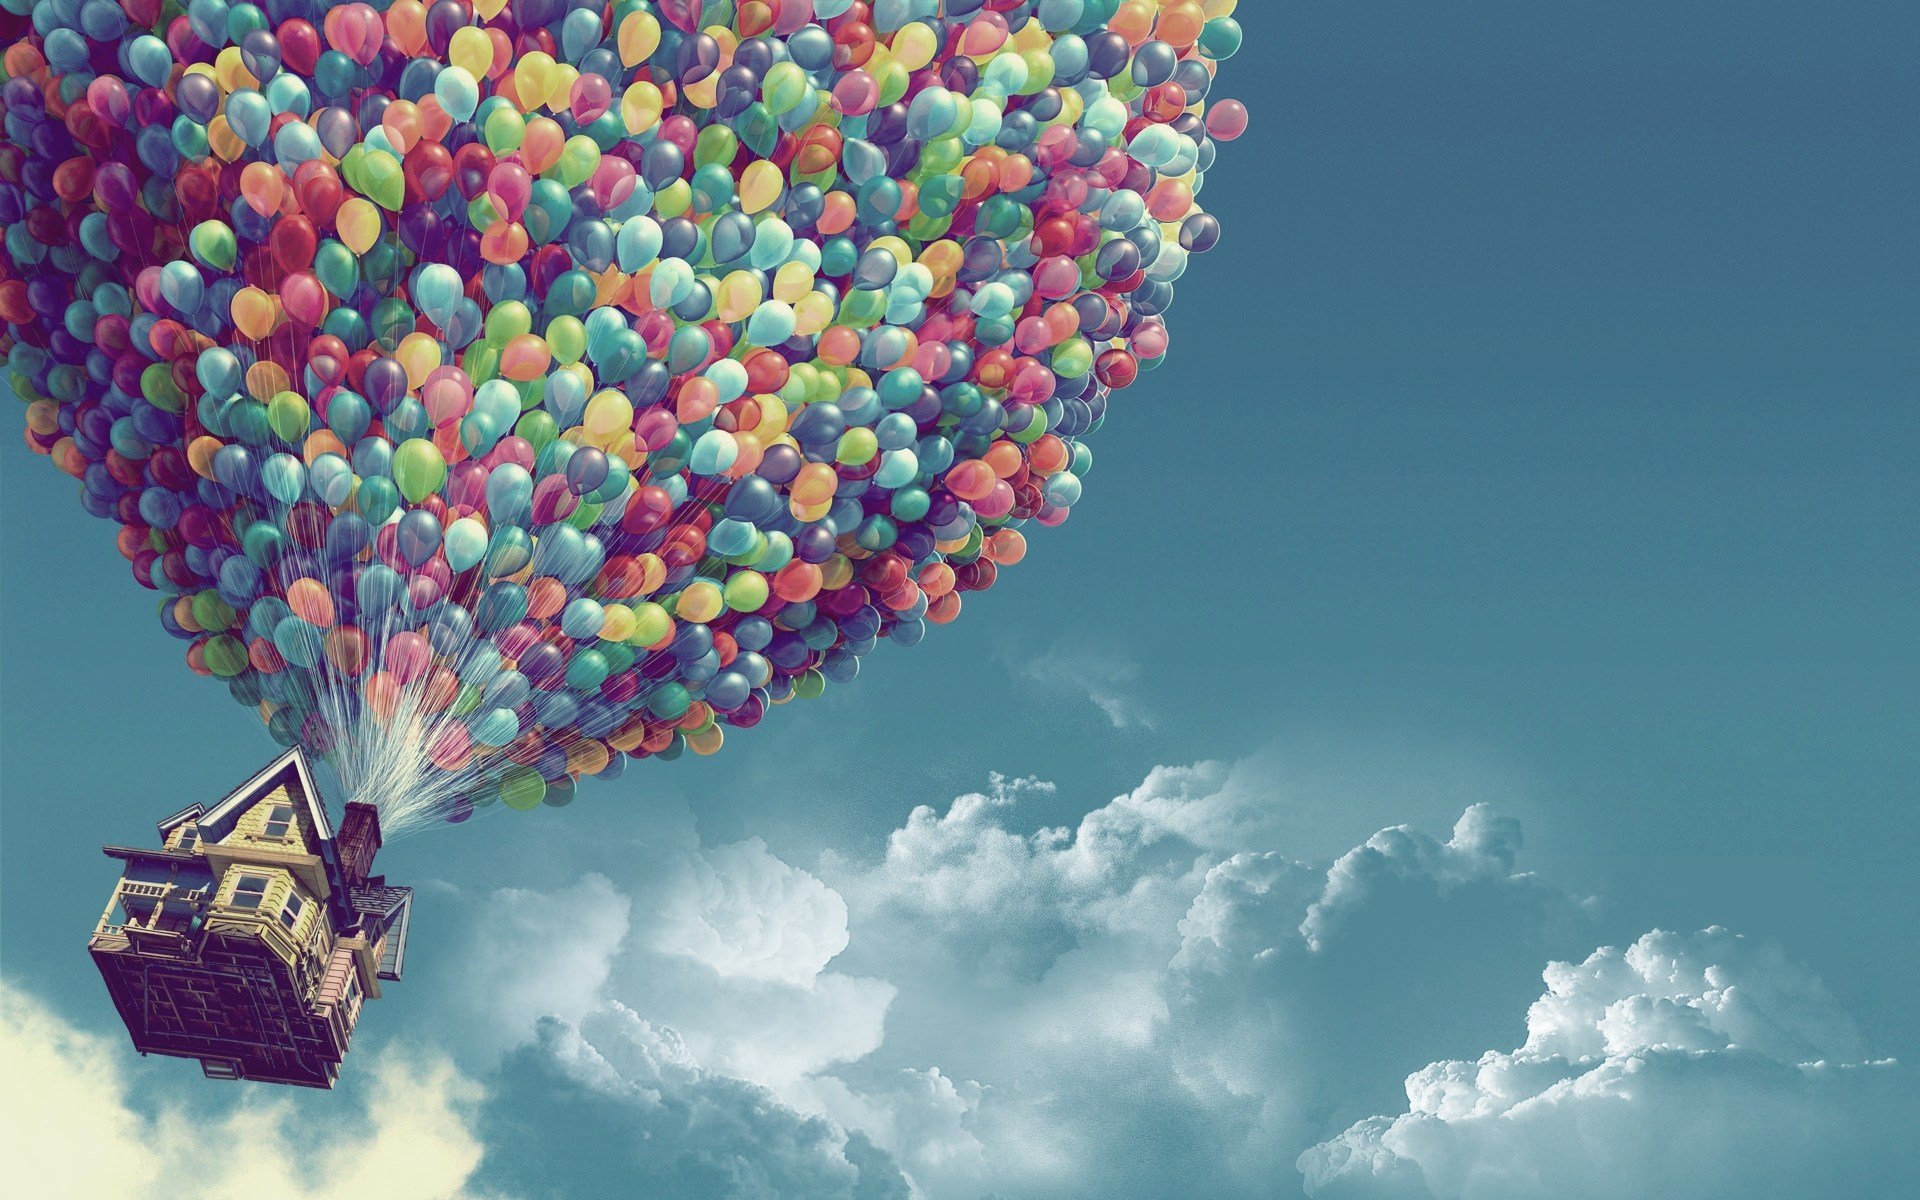 clouds, Houses, Movie, Balloons, Pixar, Skyscapes Wallpaper